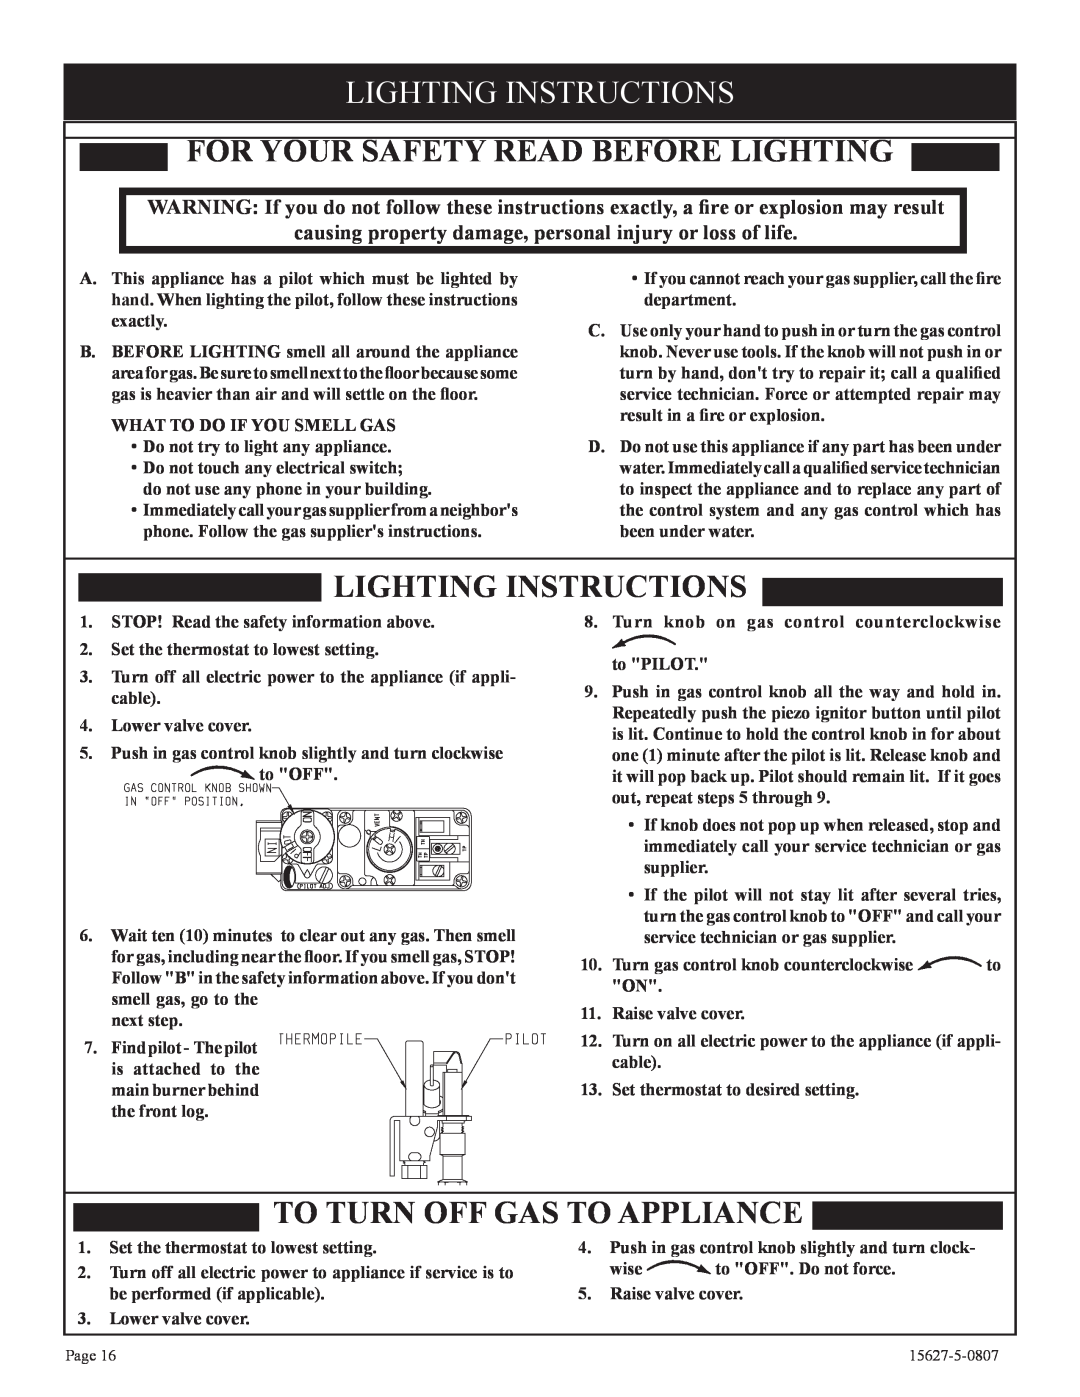 Empire Comfort Systems CIBV-30-20 Lighting Instructions, For Your Safety Read Before Lighting, Lower valve cover 